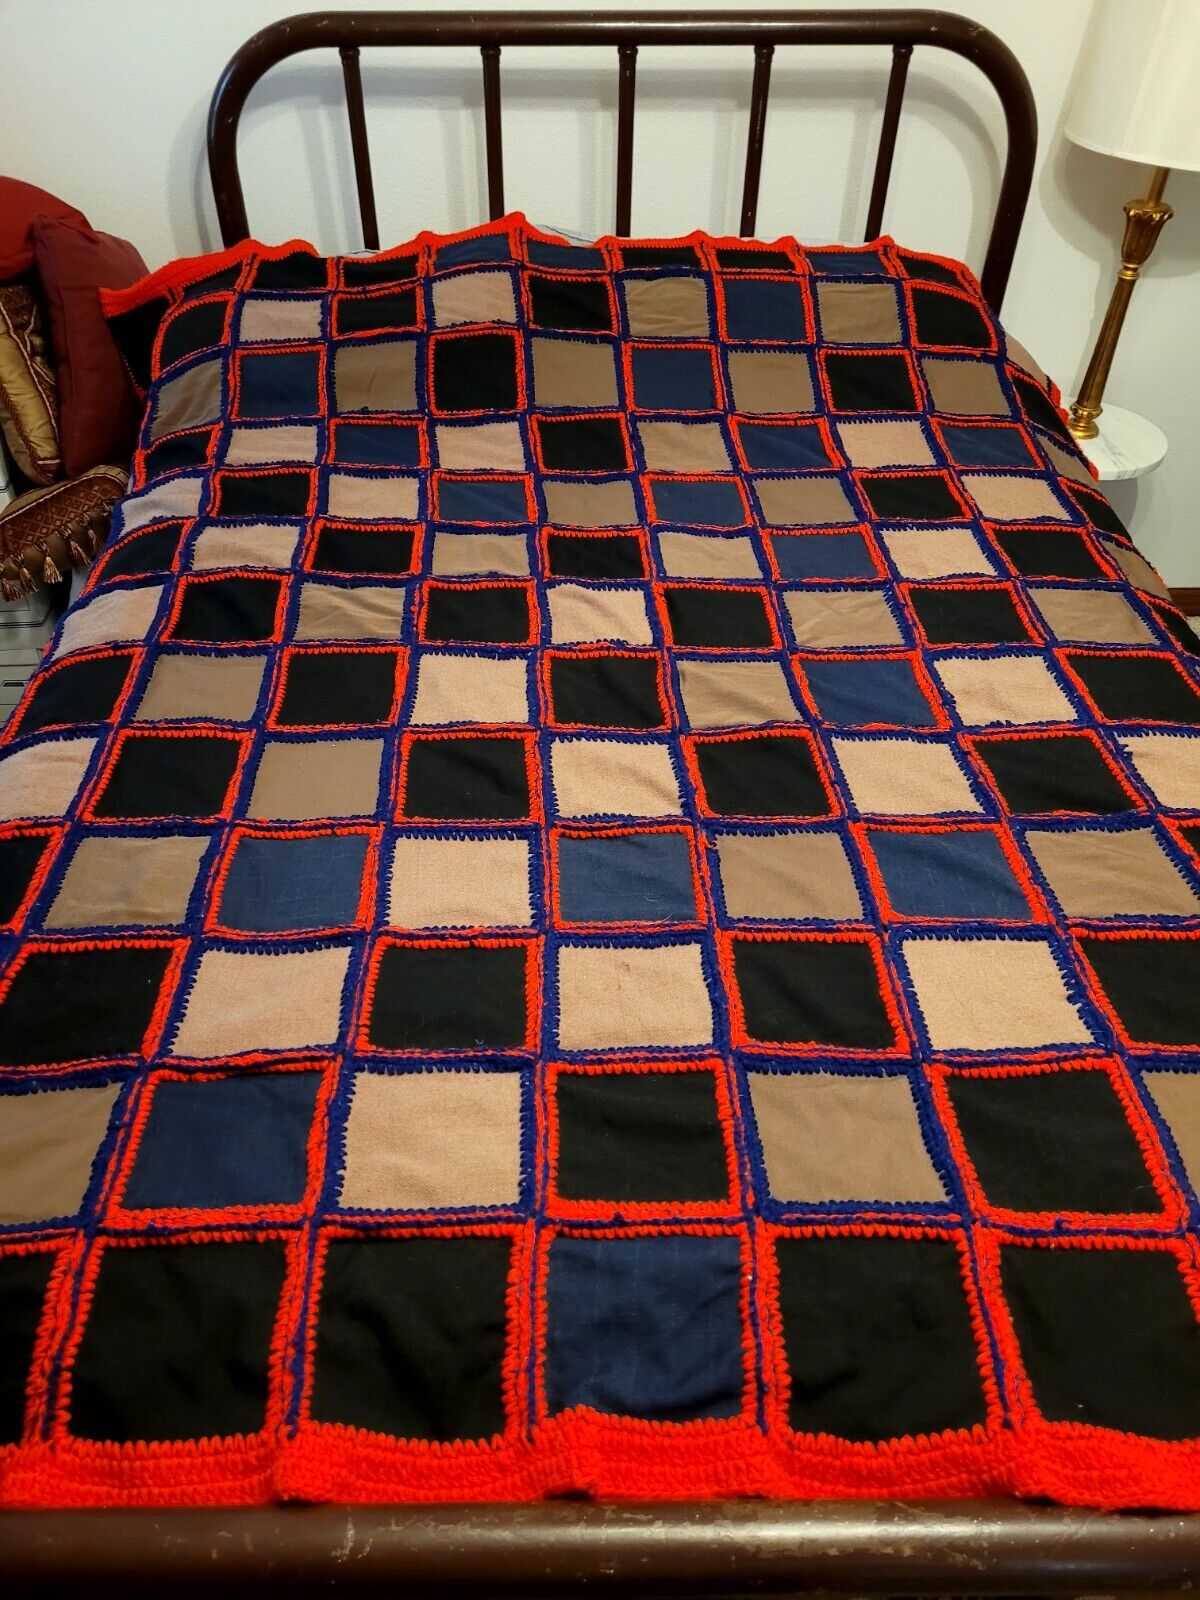 Vintage Large Fusion Quilt With Fabric Squares Crocheted Together